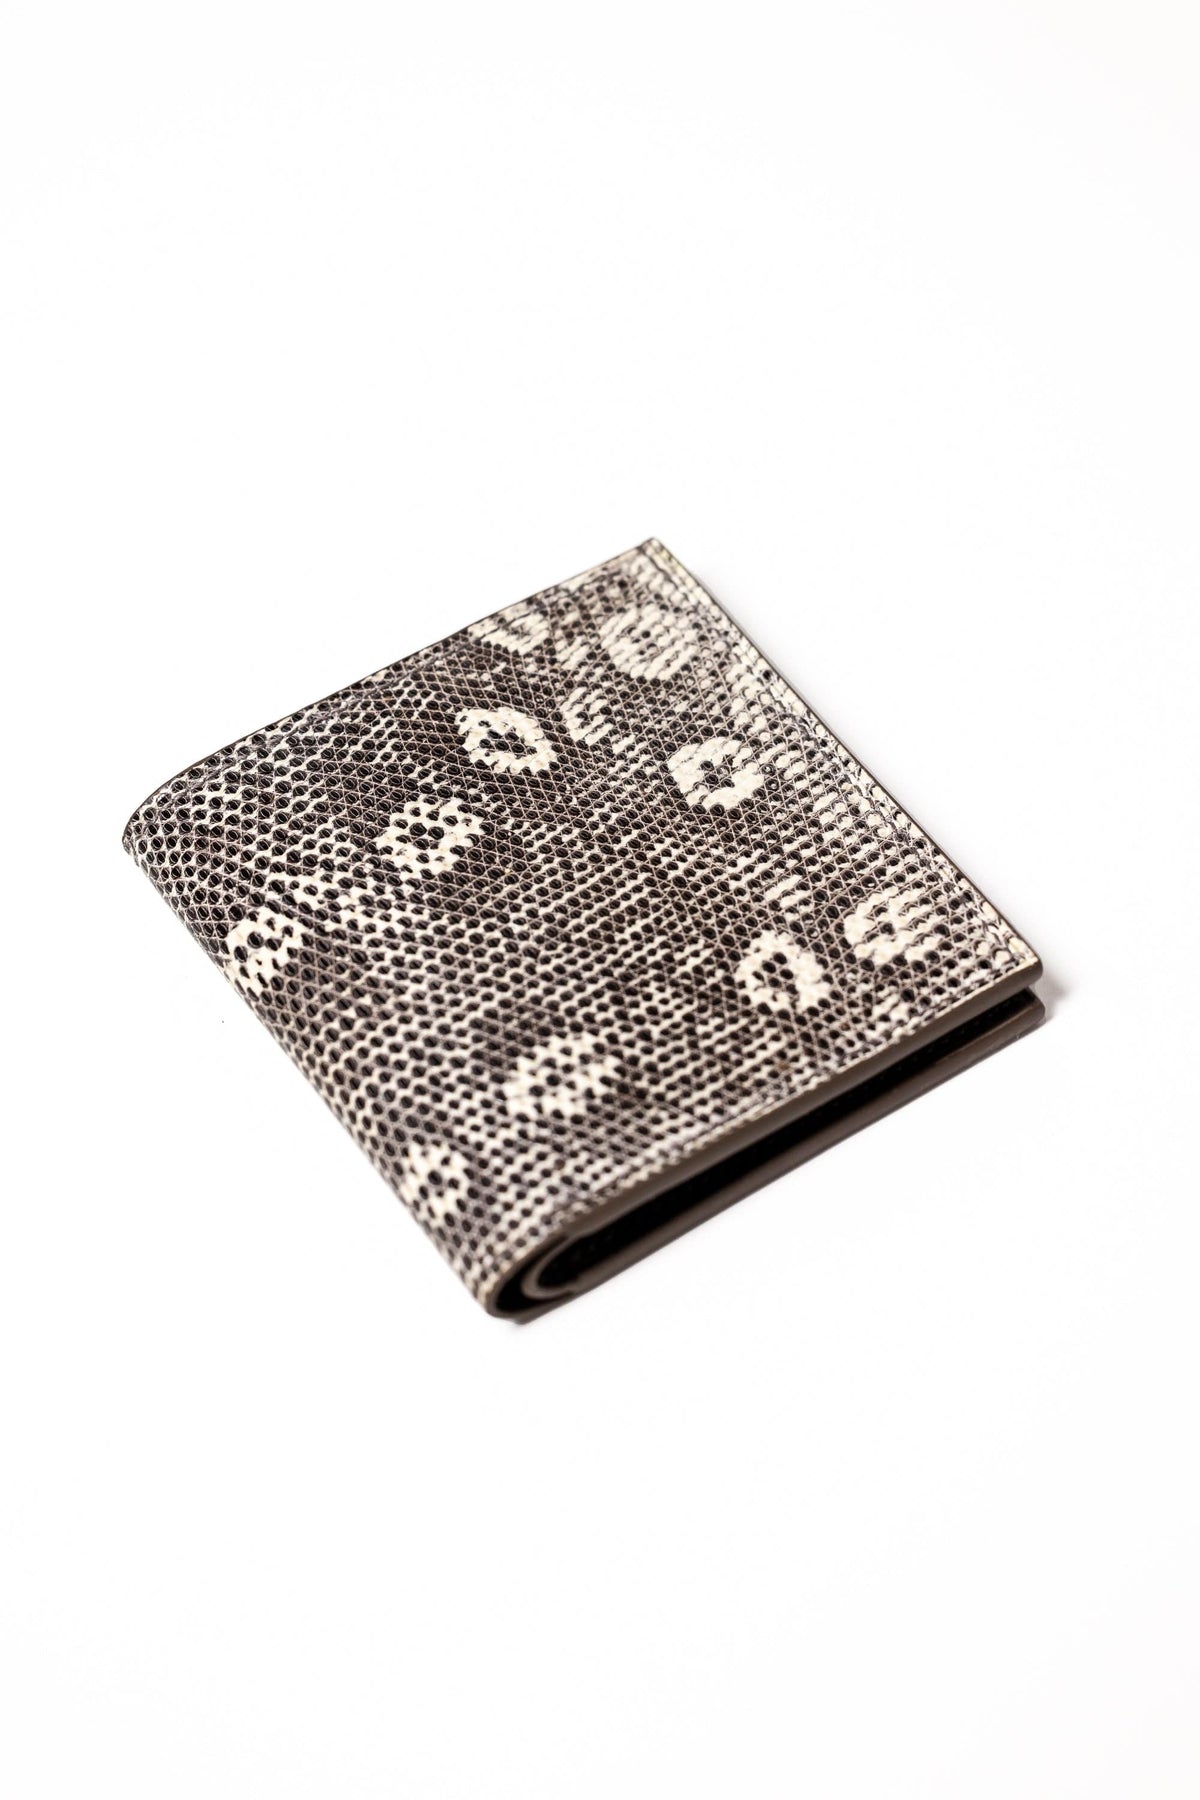 SAMPLE The Tremont Wallet - Natural Ring Lizard